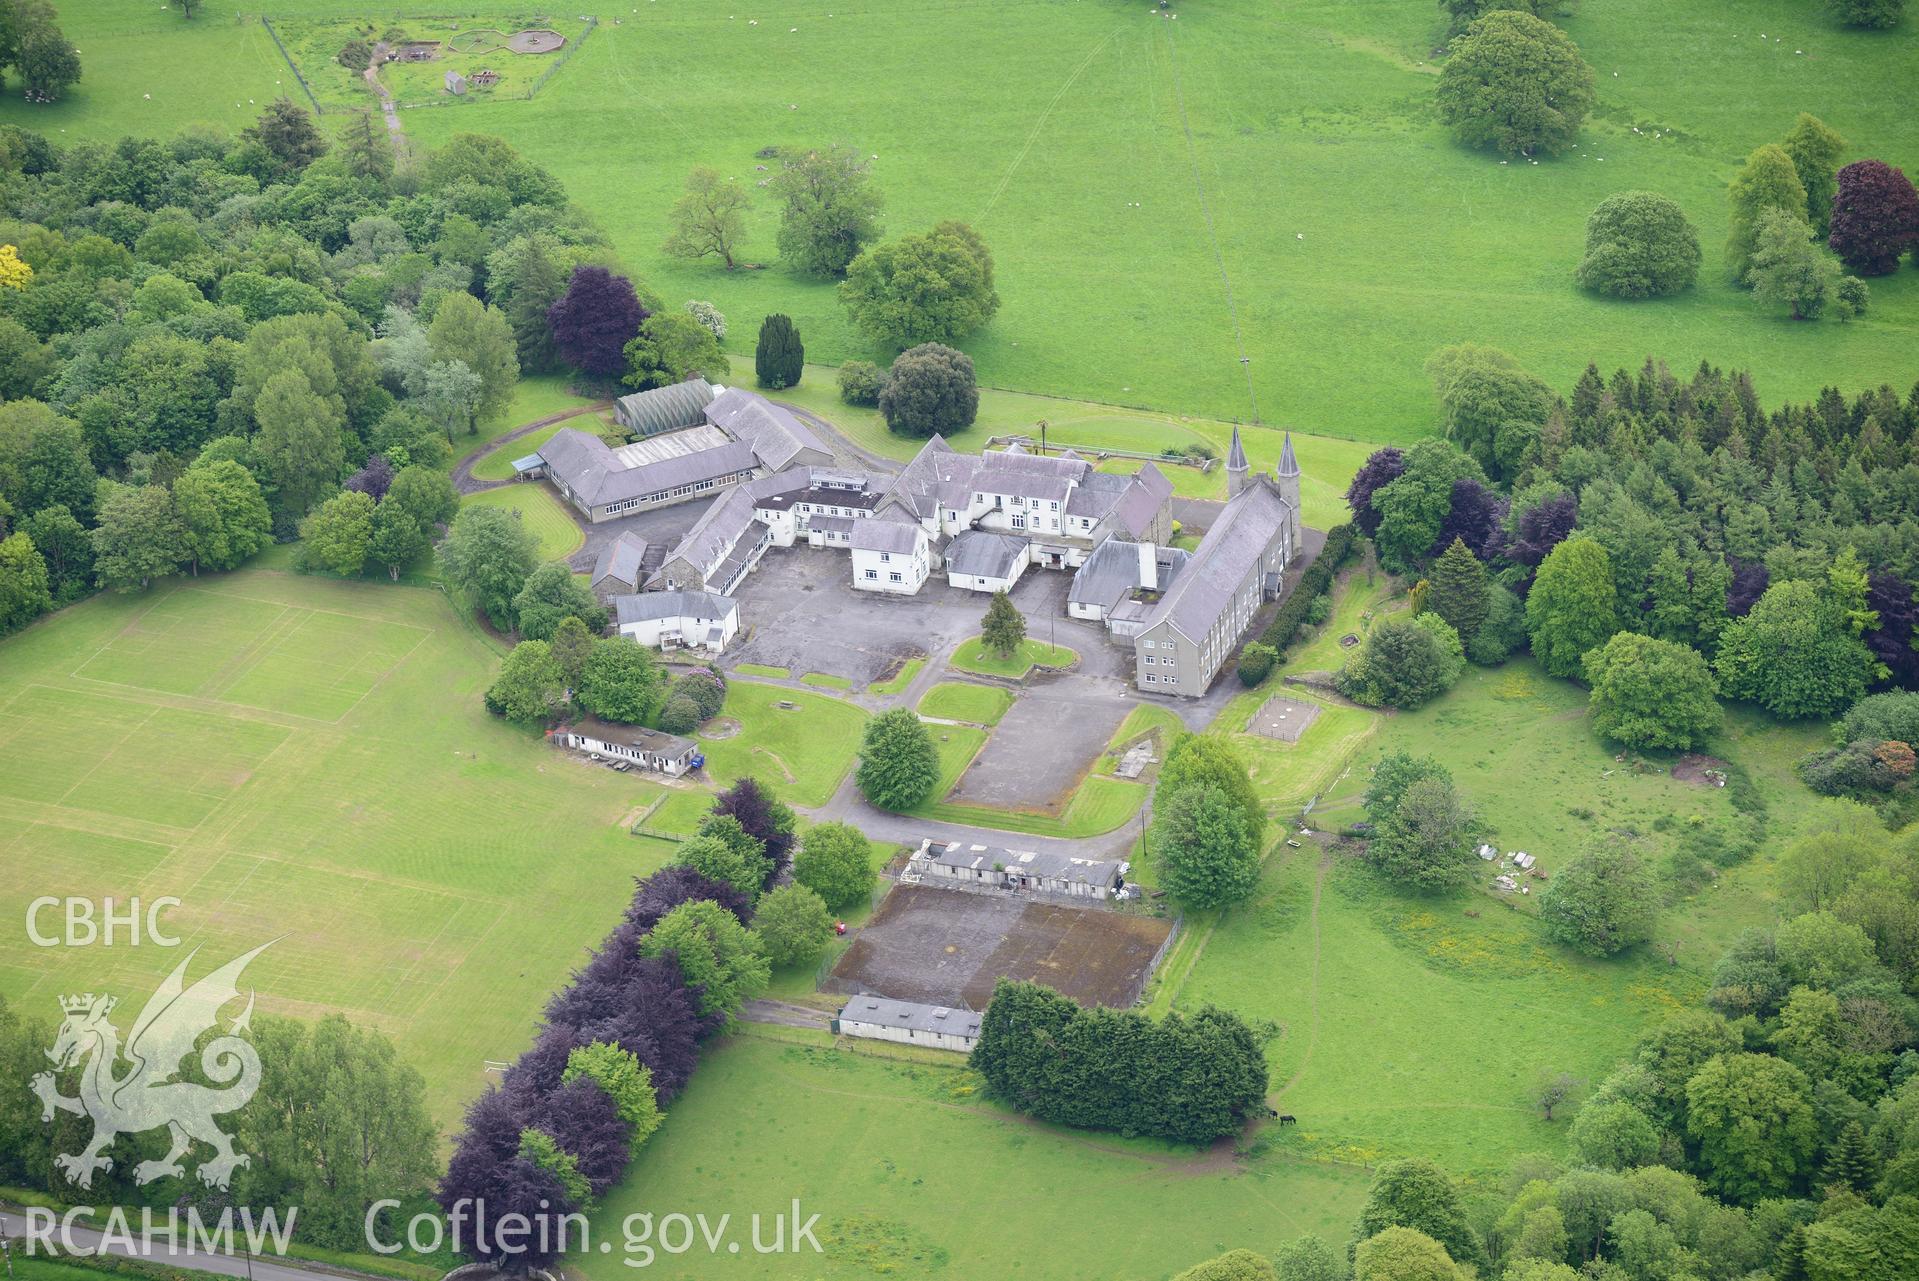 Highmead house and garden, Llanybydder. Oblique aerial photograph taken during the Royal Commission's programme of archaeological aerial reconnaissance by Toby Driver on 3rd June 2015.